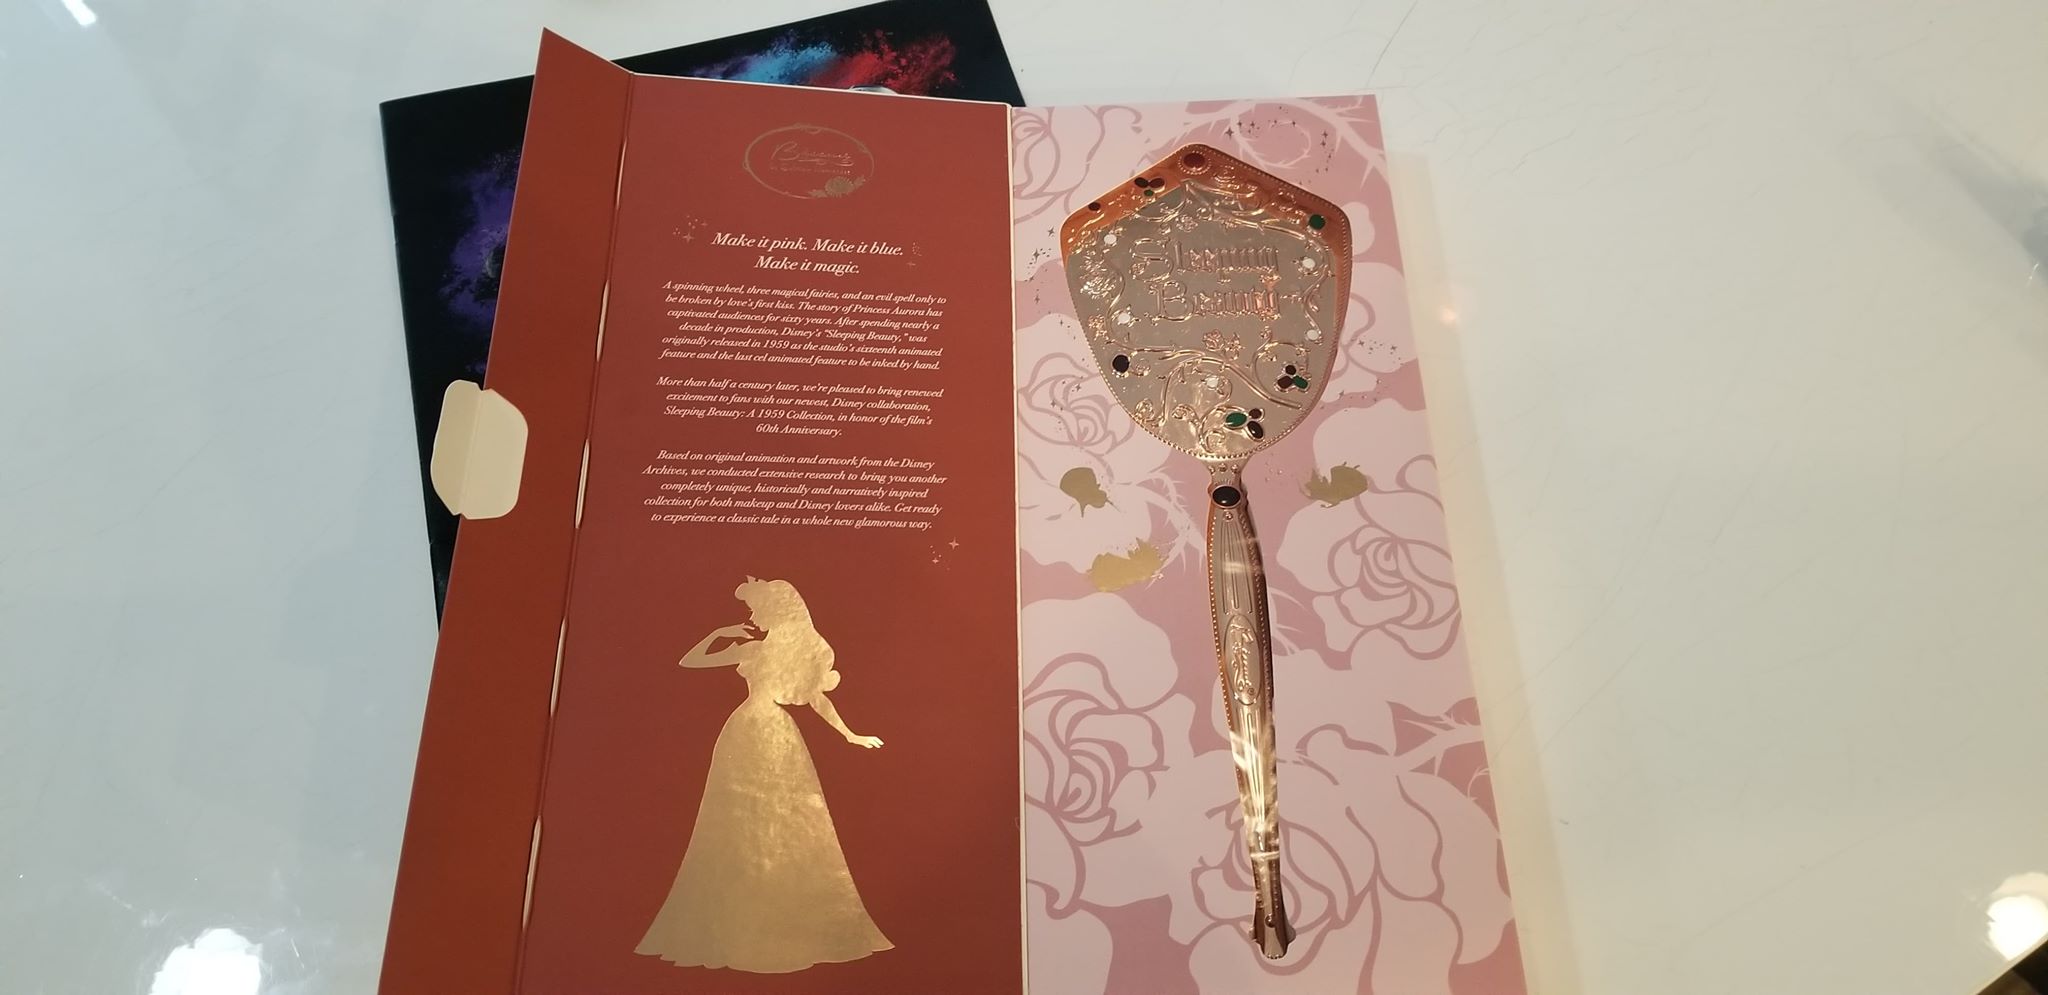 Bésame Sleeping Beauty Makeup Collection Is Fit For A Princess